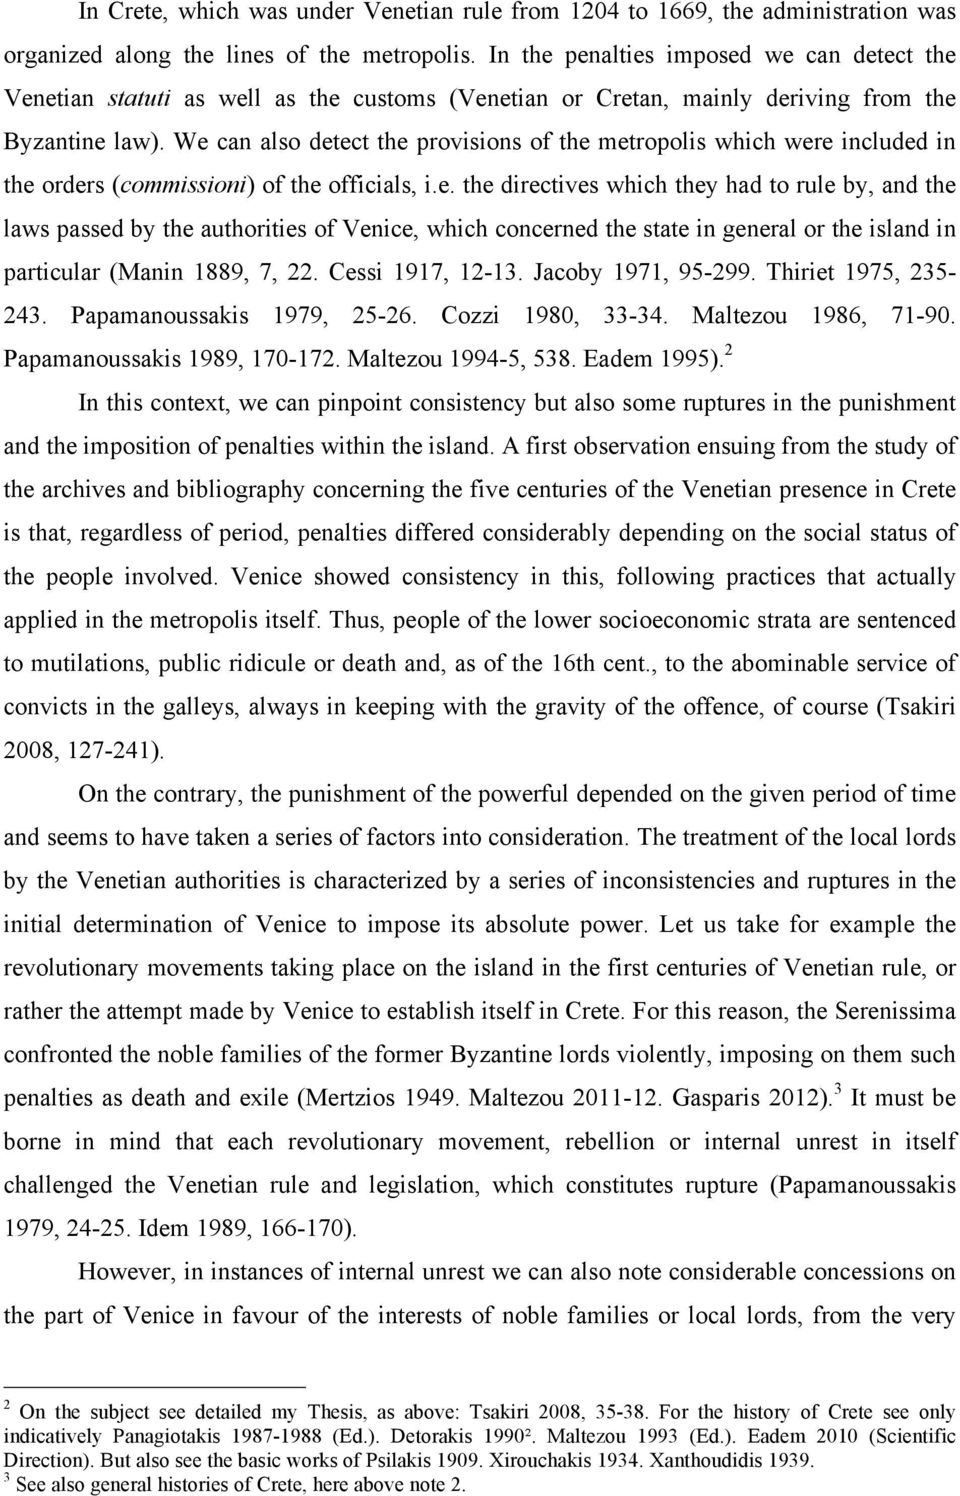 We can also detect the provisions of the metropolis which were included in the orders (commissioni) of the officials, i.e. the directives which they had to rule by, and the laws passed by the authorities of Venice, which concerned the state in general or the island in particular (Manin 1889, 7, 22.